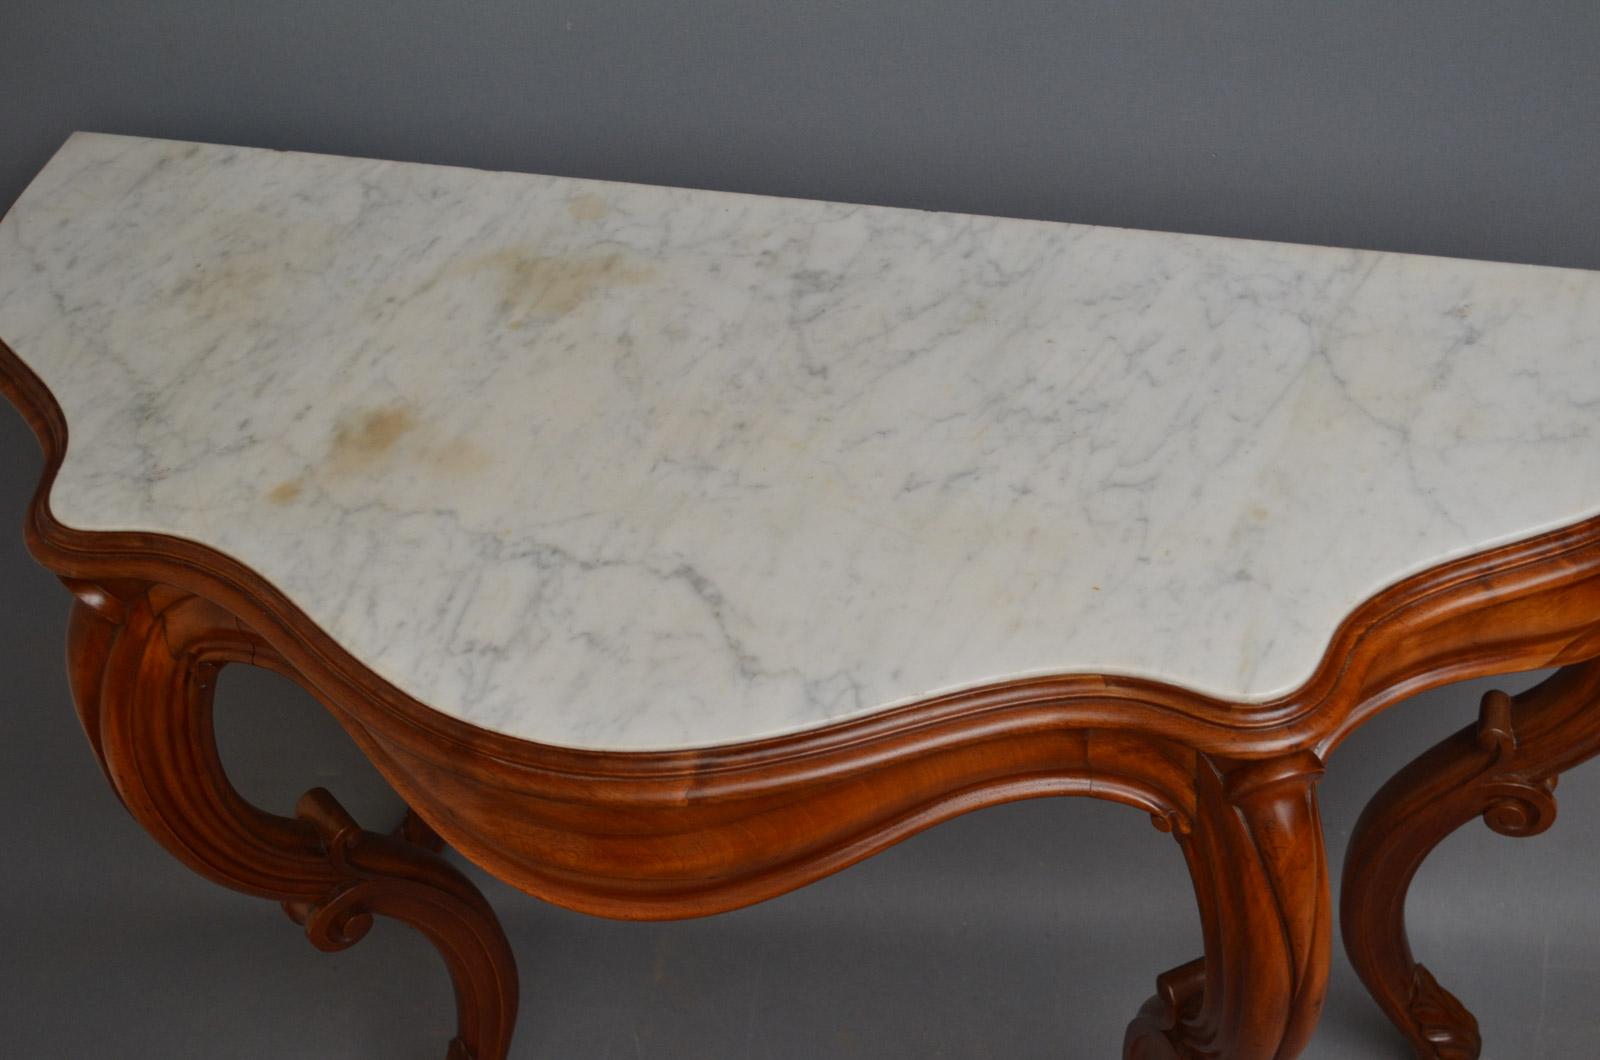 Sn3426, attractive Victorian, mahogany hall table of serpentine design, having original white, veined marble top with moulded edge above shaped, frieze drawer, all raise on 4 carved, cabriole legs. This antique hall table has been sympathetically